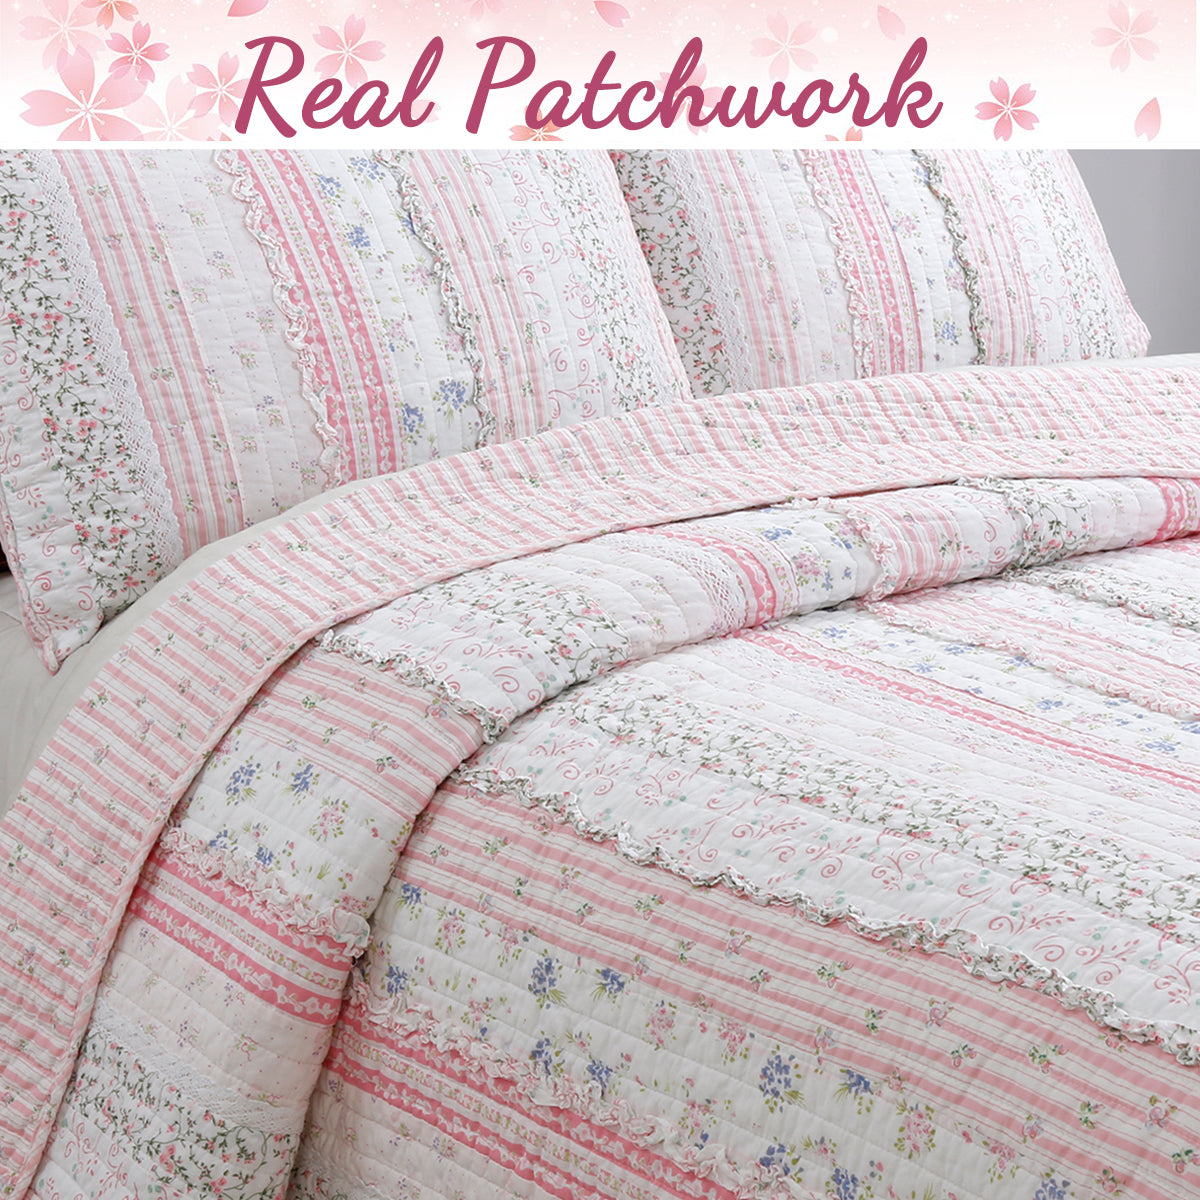 Romantic Chic Lace Ruffle Pink Real Patchwork Cotton Reversible Quilt Bedding Set